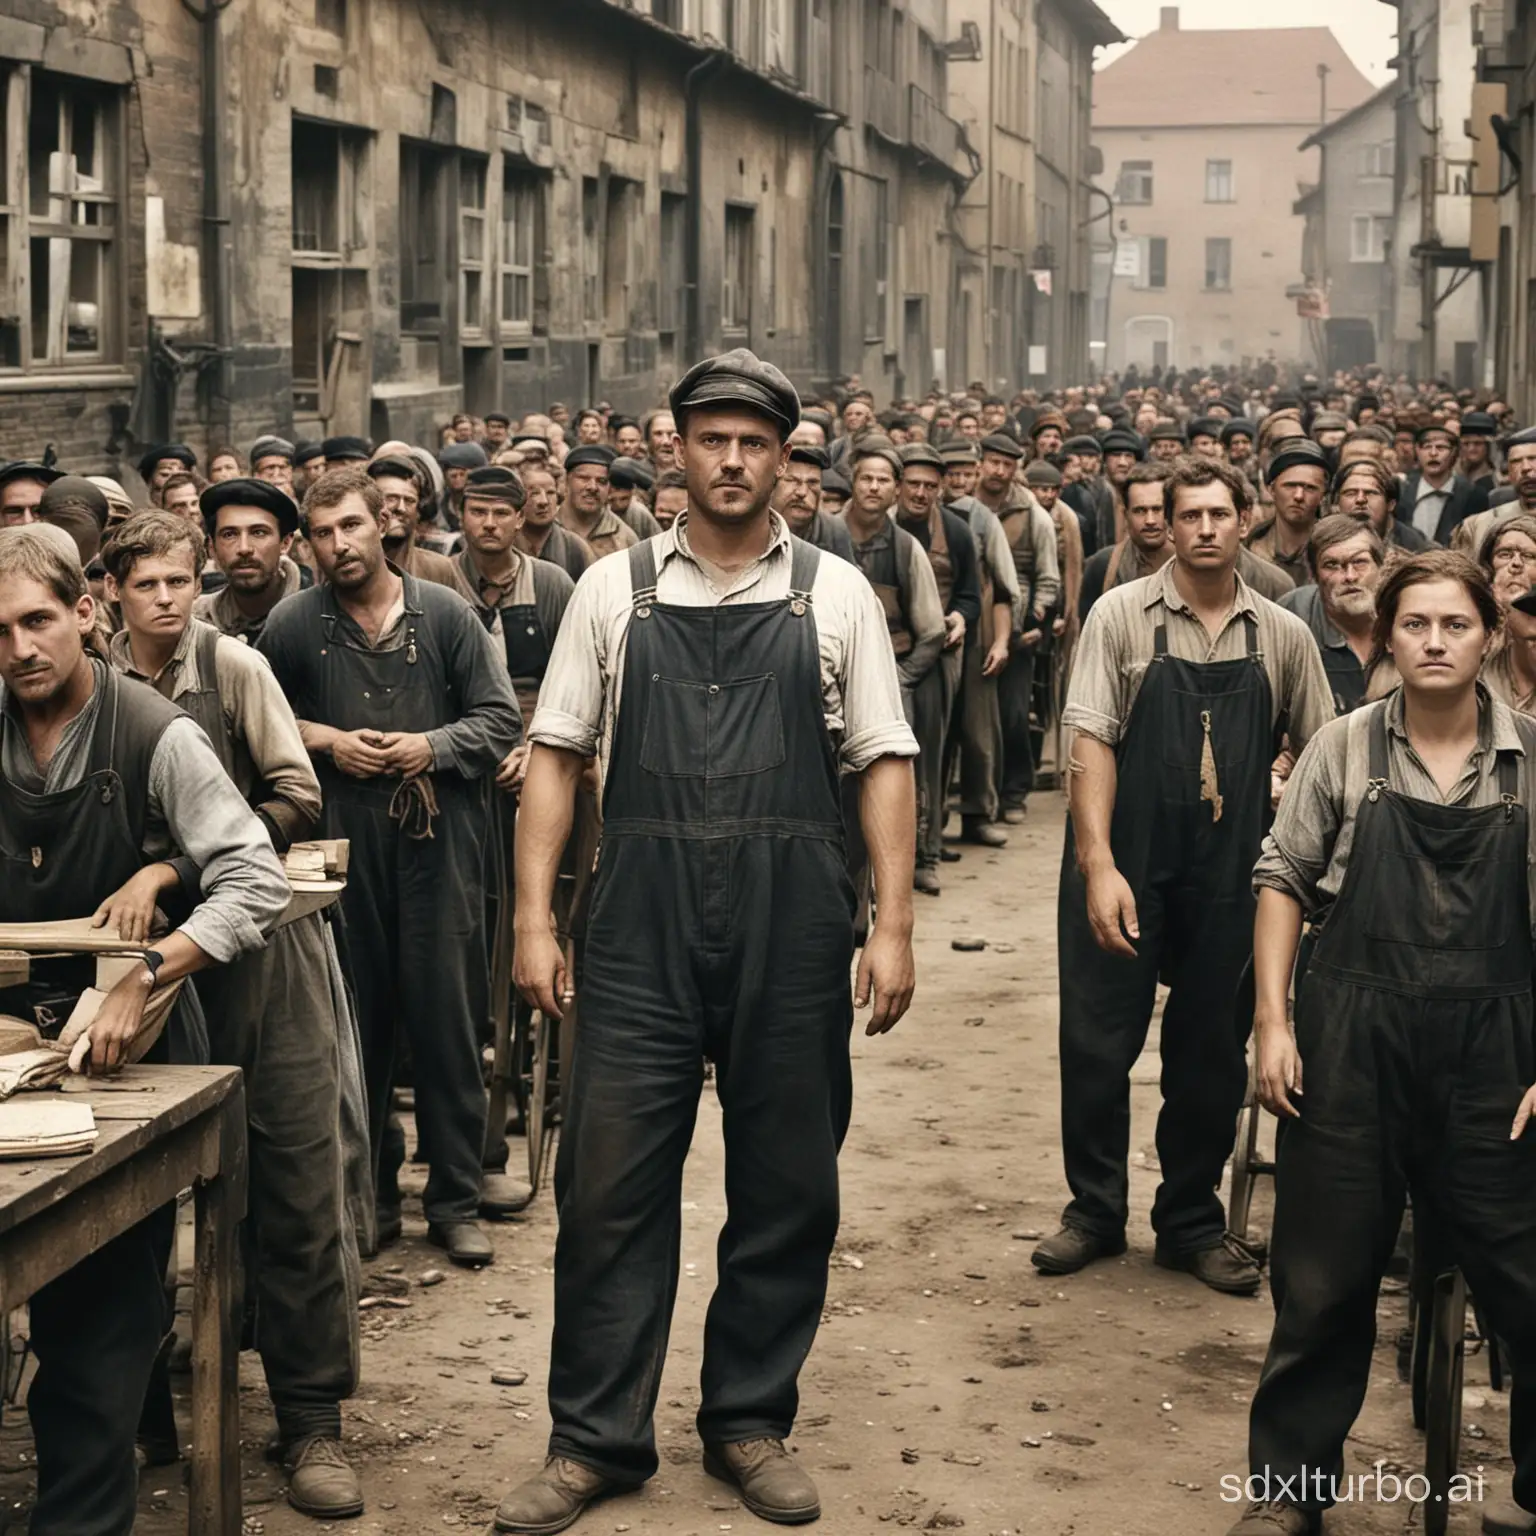 Social-Challenges-of-German-Industrialization-Workers-Struggle